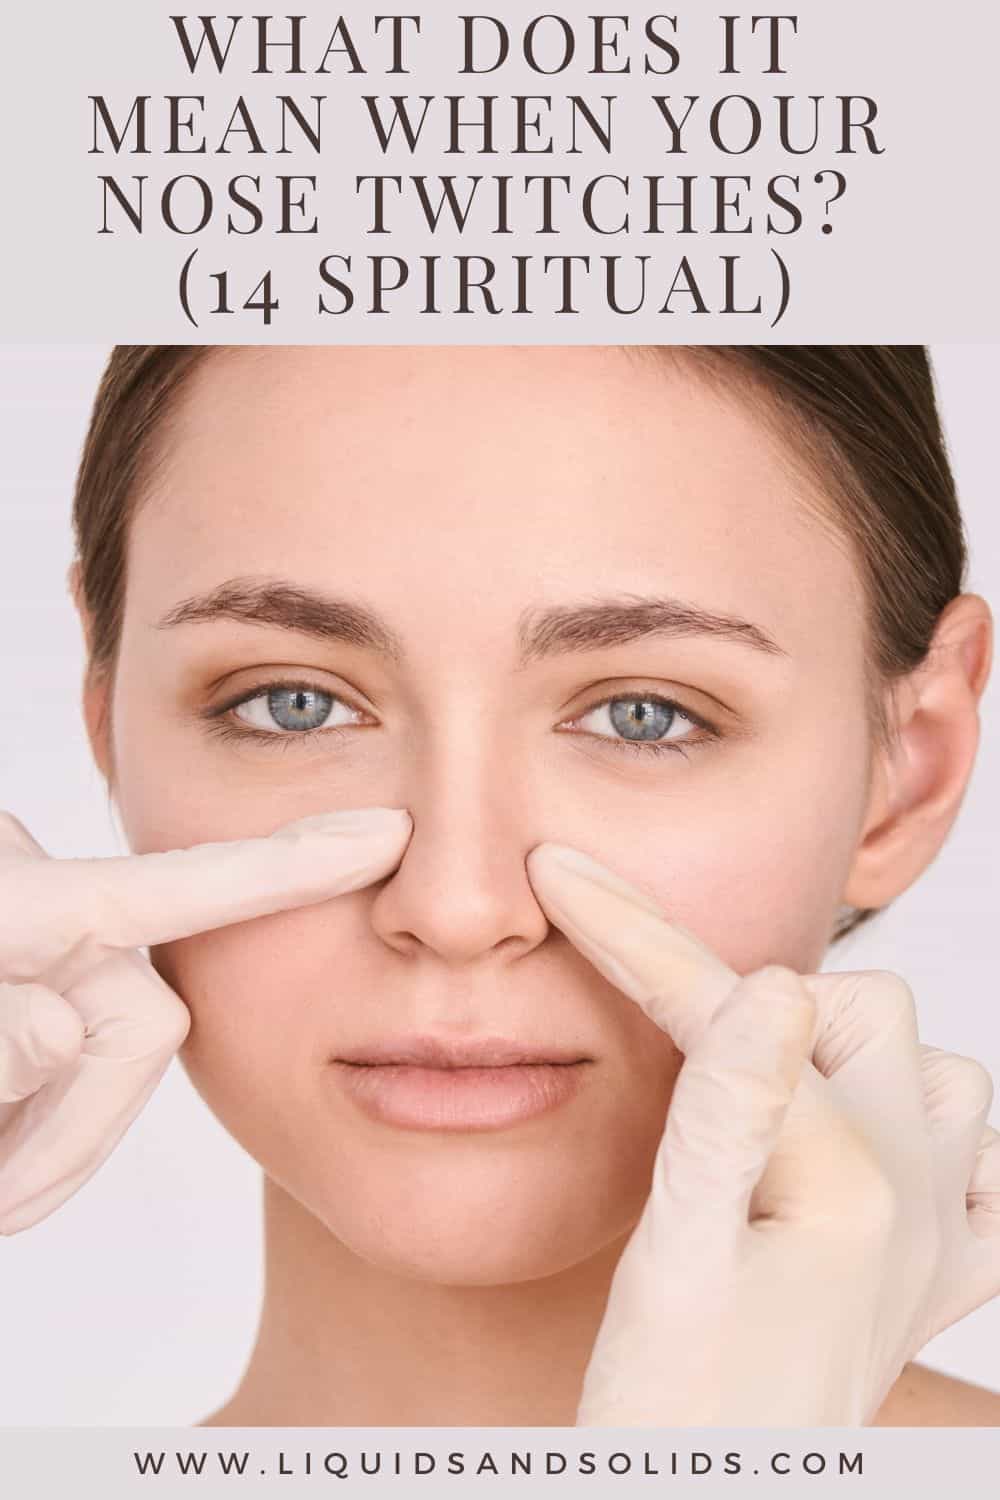 What Does It Mean When Your Nose Twitches? (14 Spiritual)